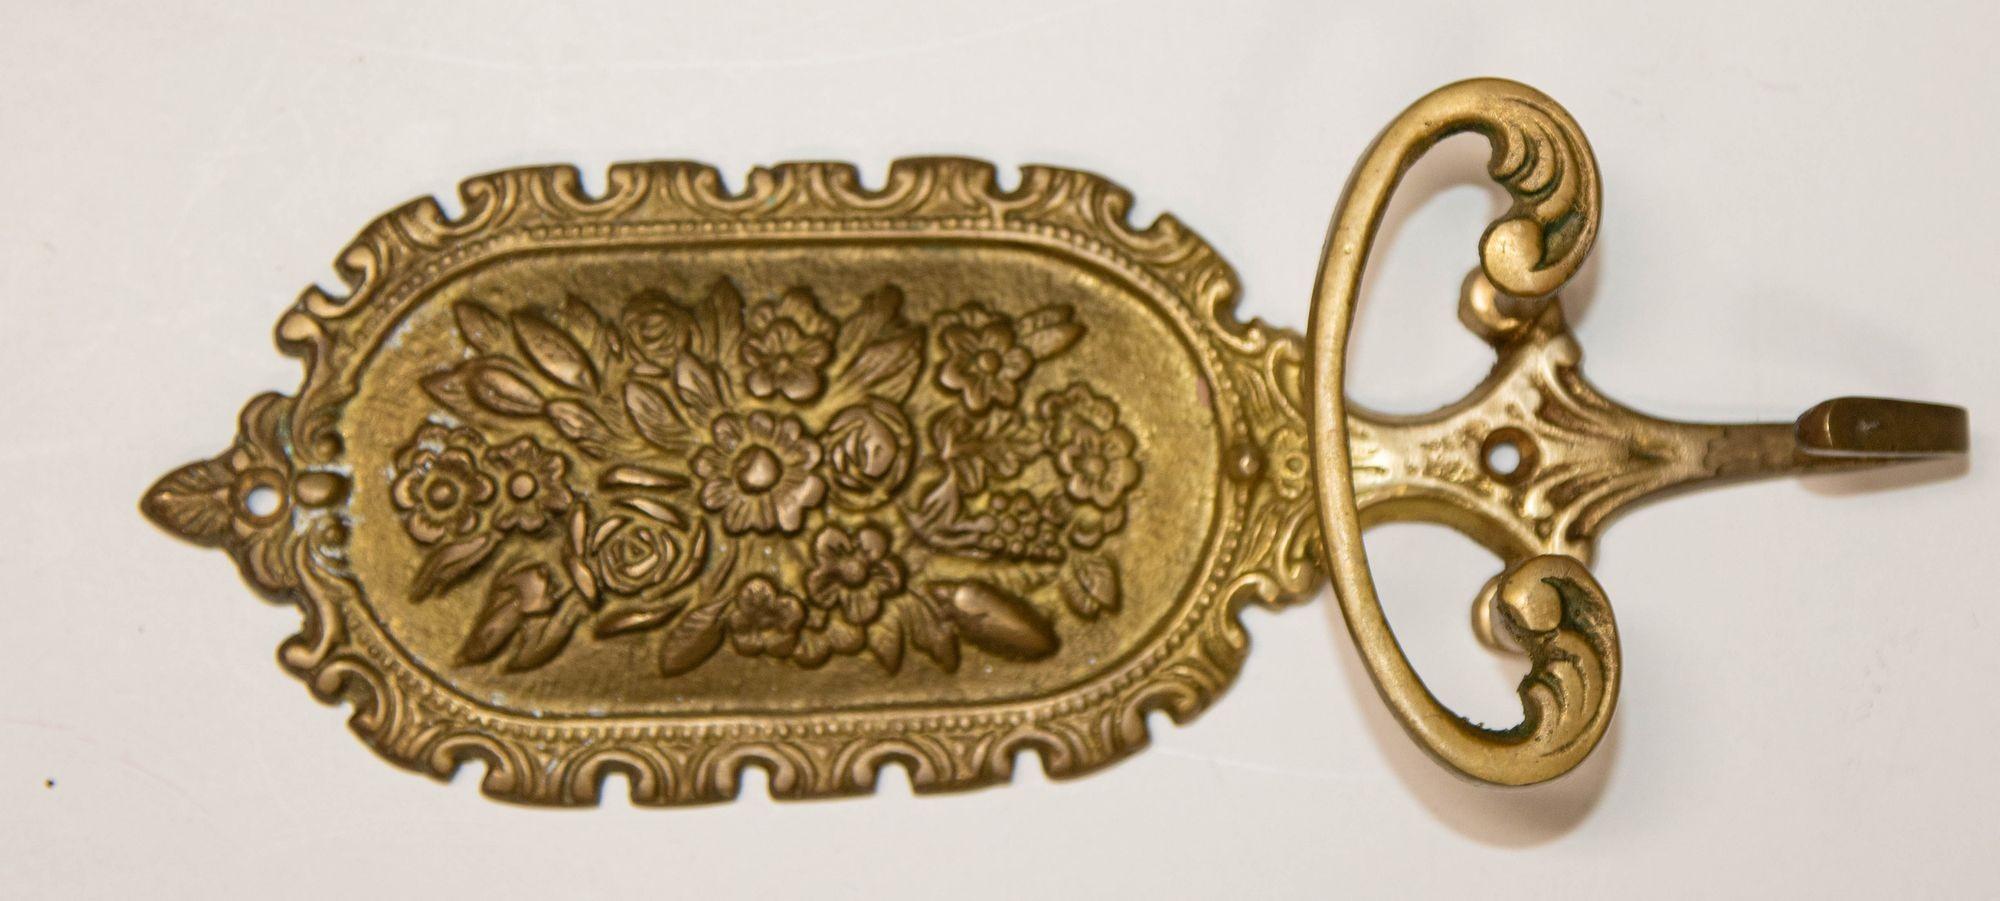 Architectural Italian Cast Brass Floral Wall Hook Decor Made in Italy 6